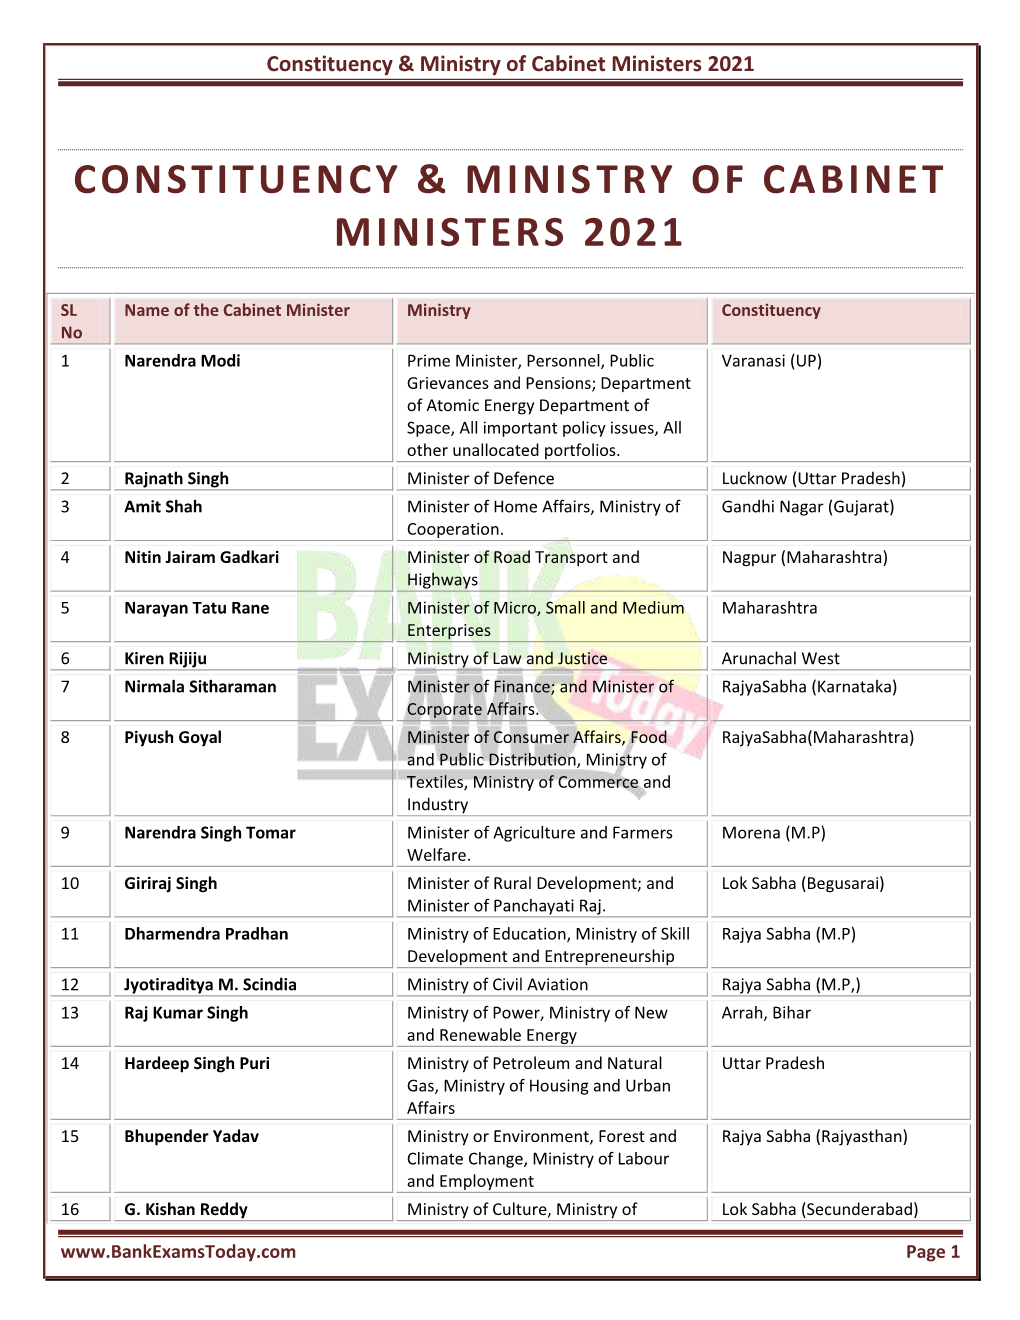 Constituency & Ministry of Cabinet Ministers 2021